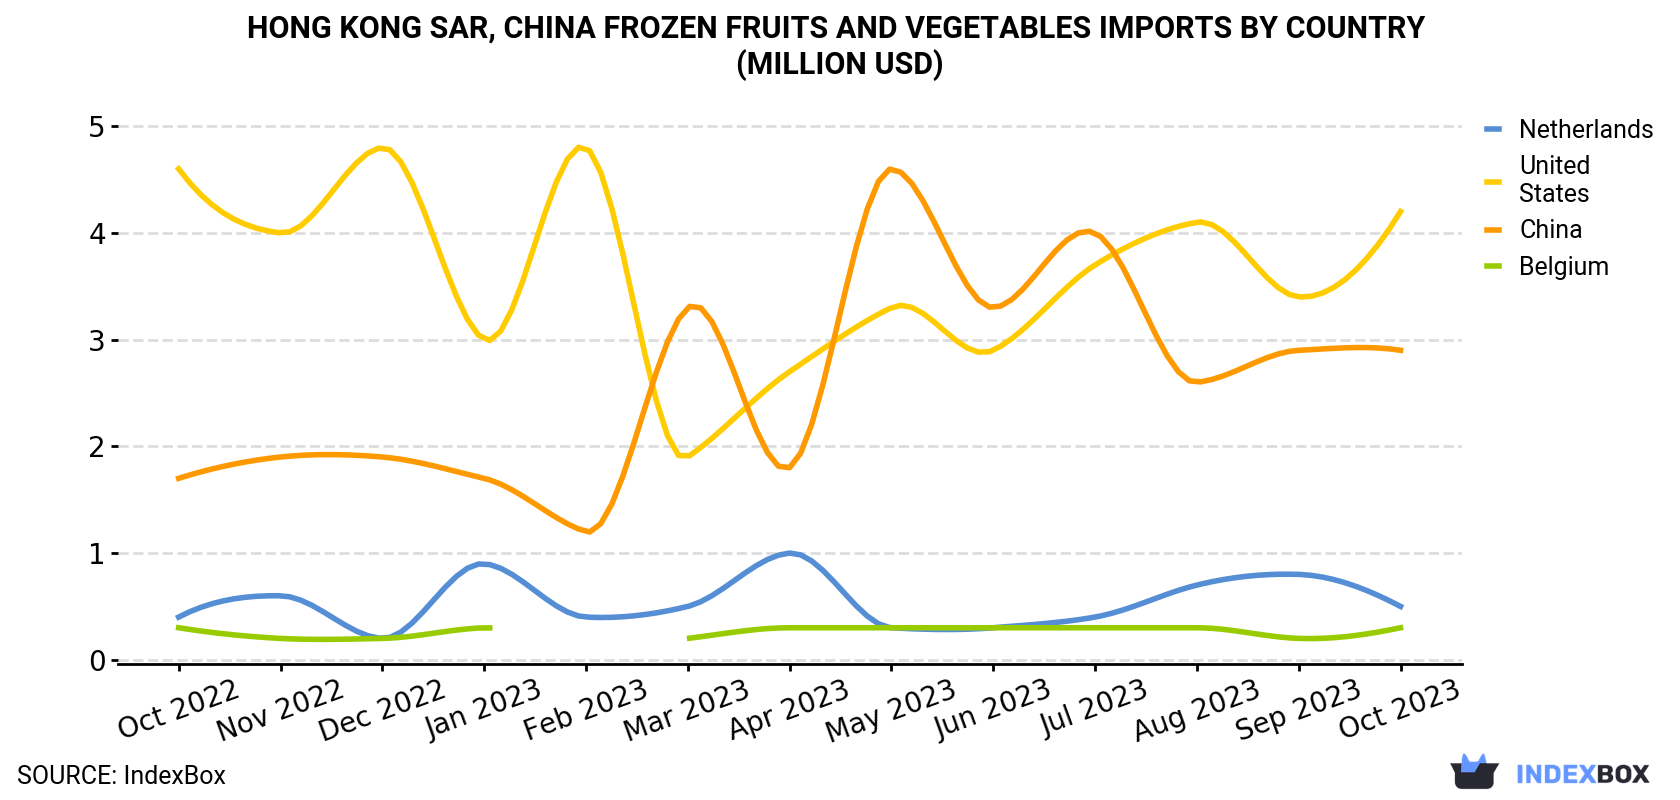 Hong Kong Frozen Fruits And Vegetables Imports By Country (Million USD)